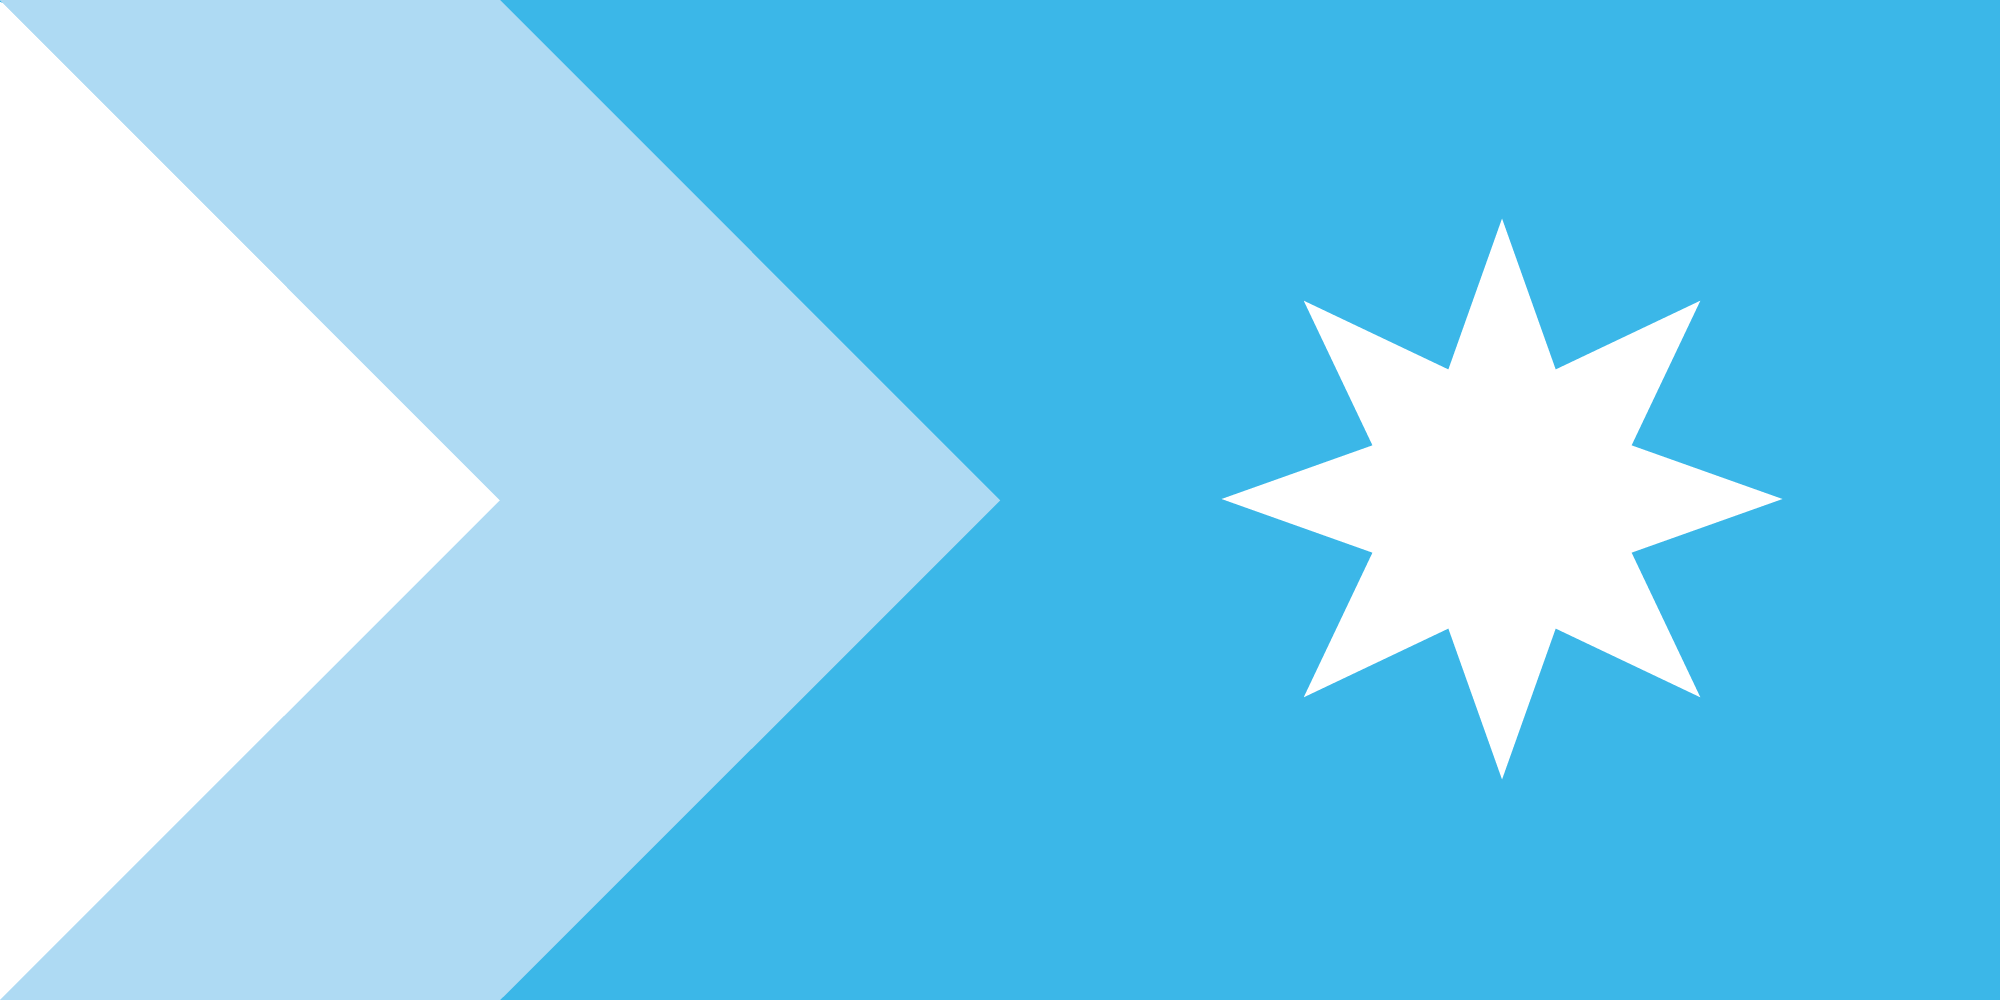 A state flag proposal for NSW